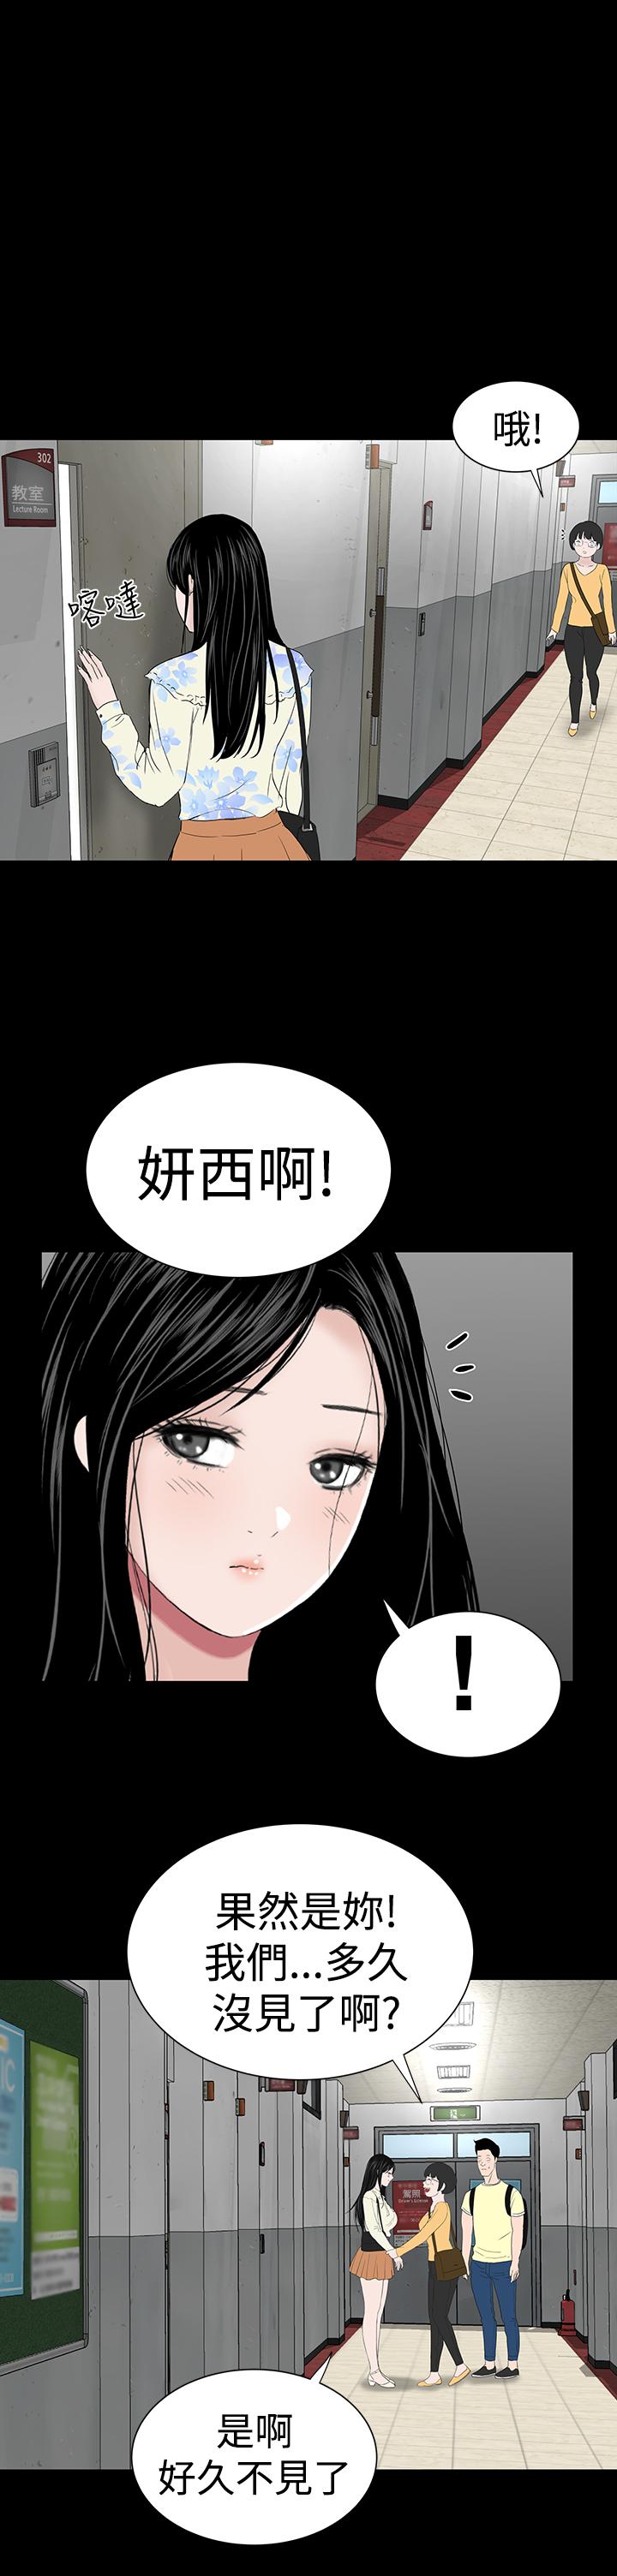 one woman brothel 楼凤 Ch.43~47END [Chinese]中文 231